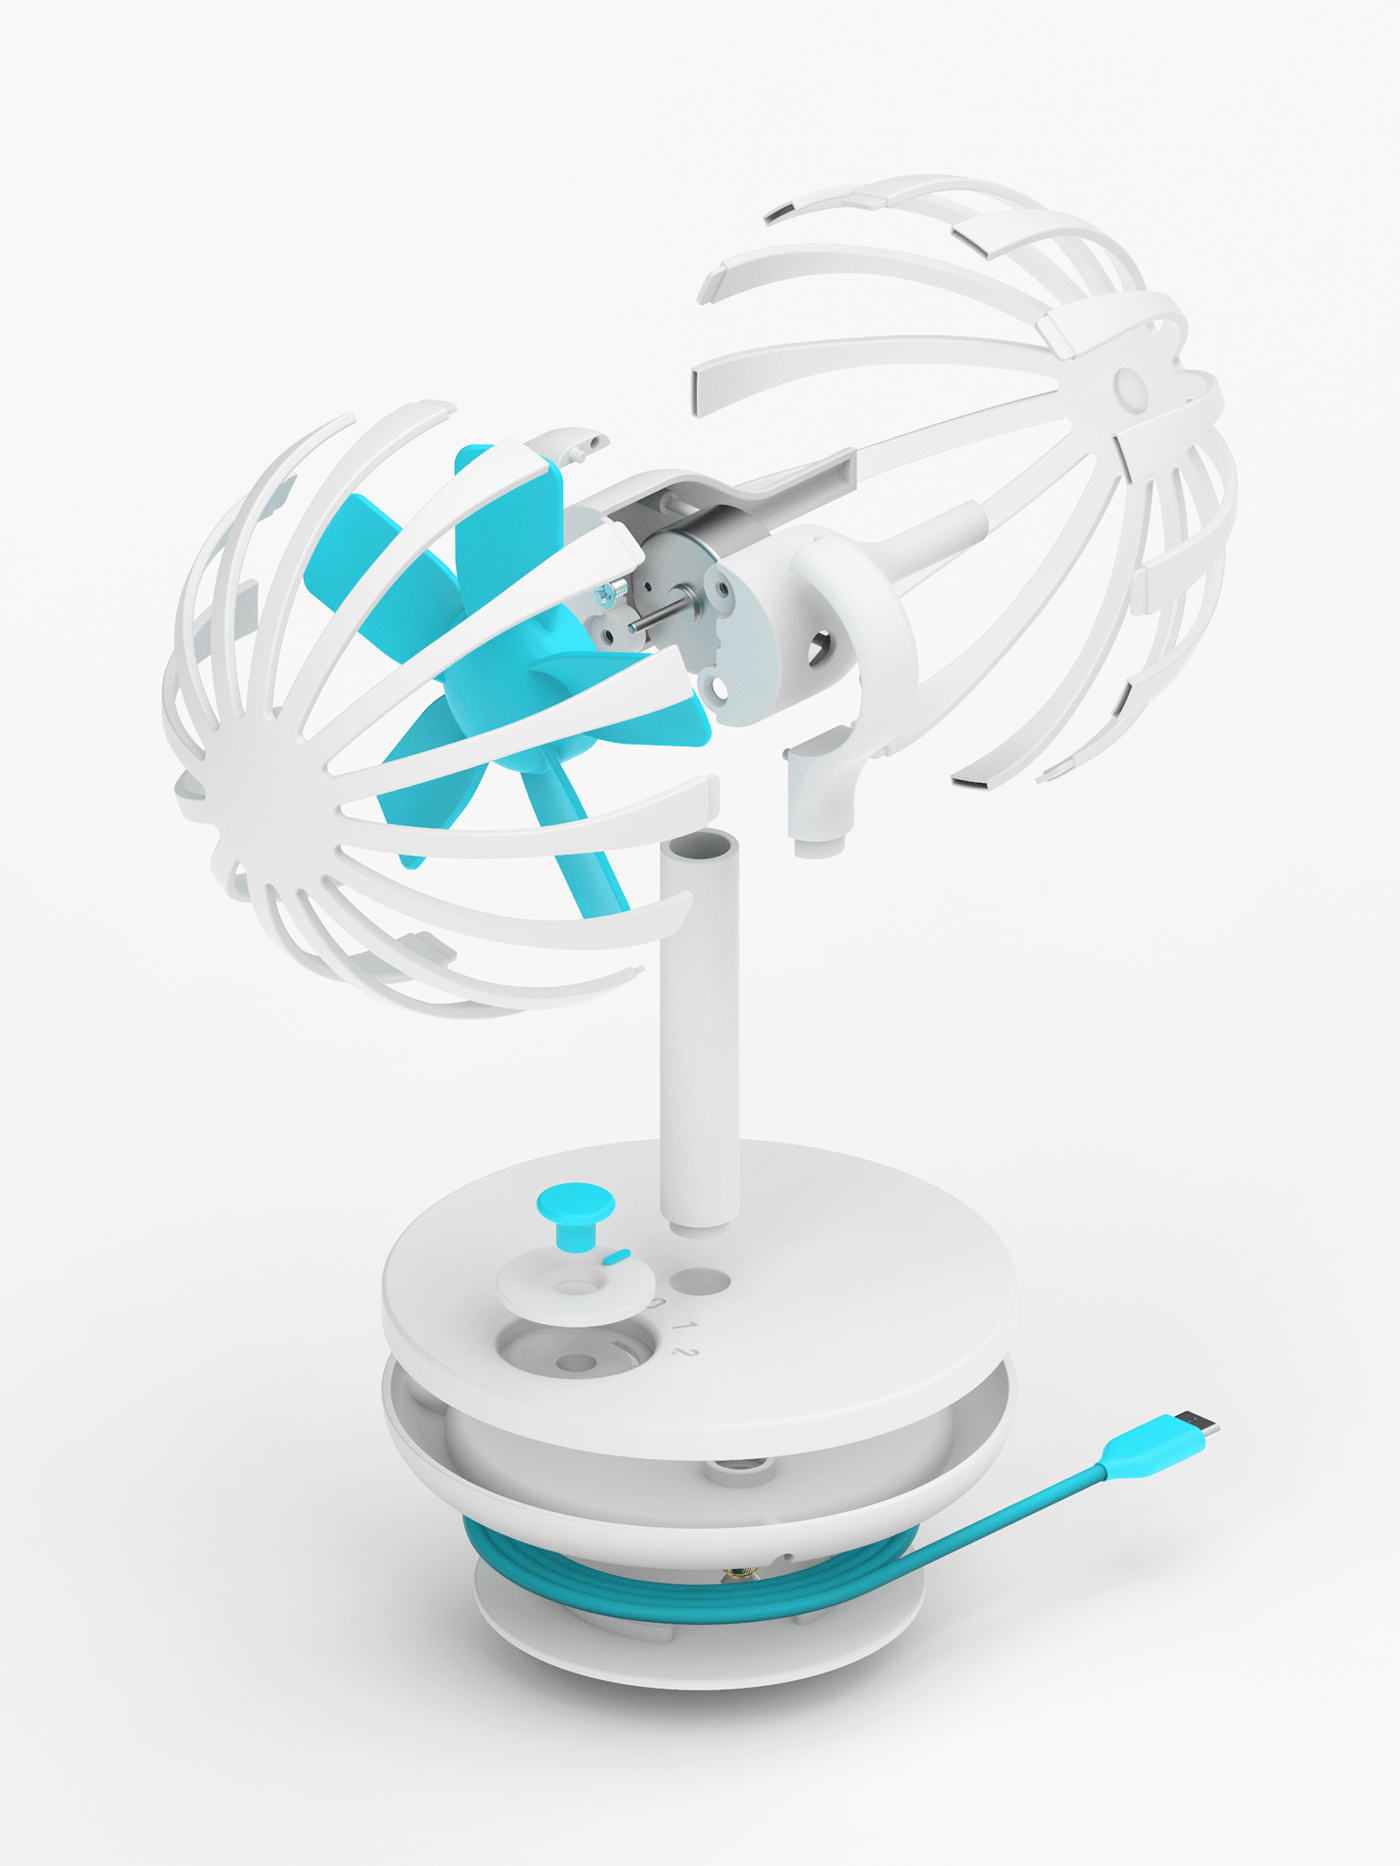 consumer electronics desk accessory fan home Office Packaging rendering